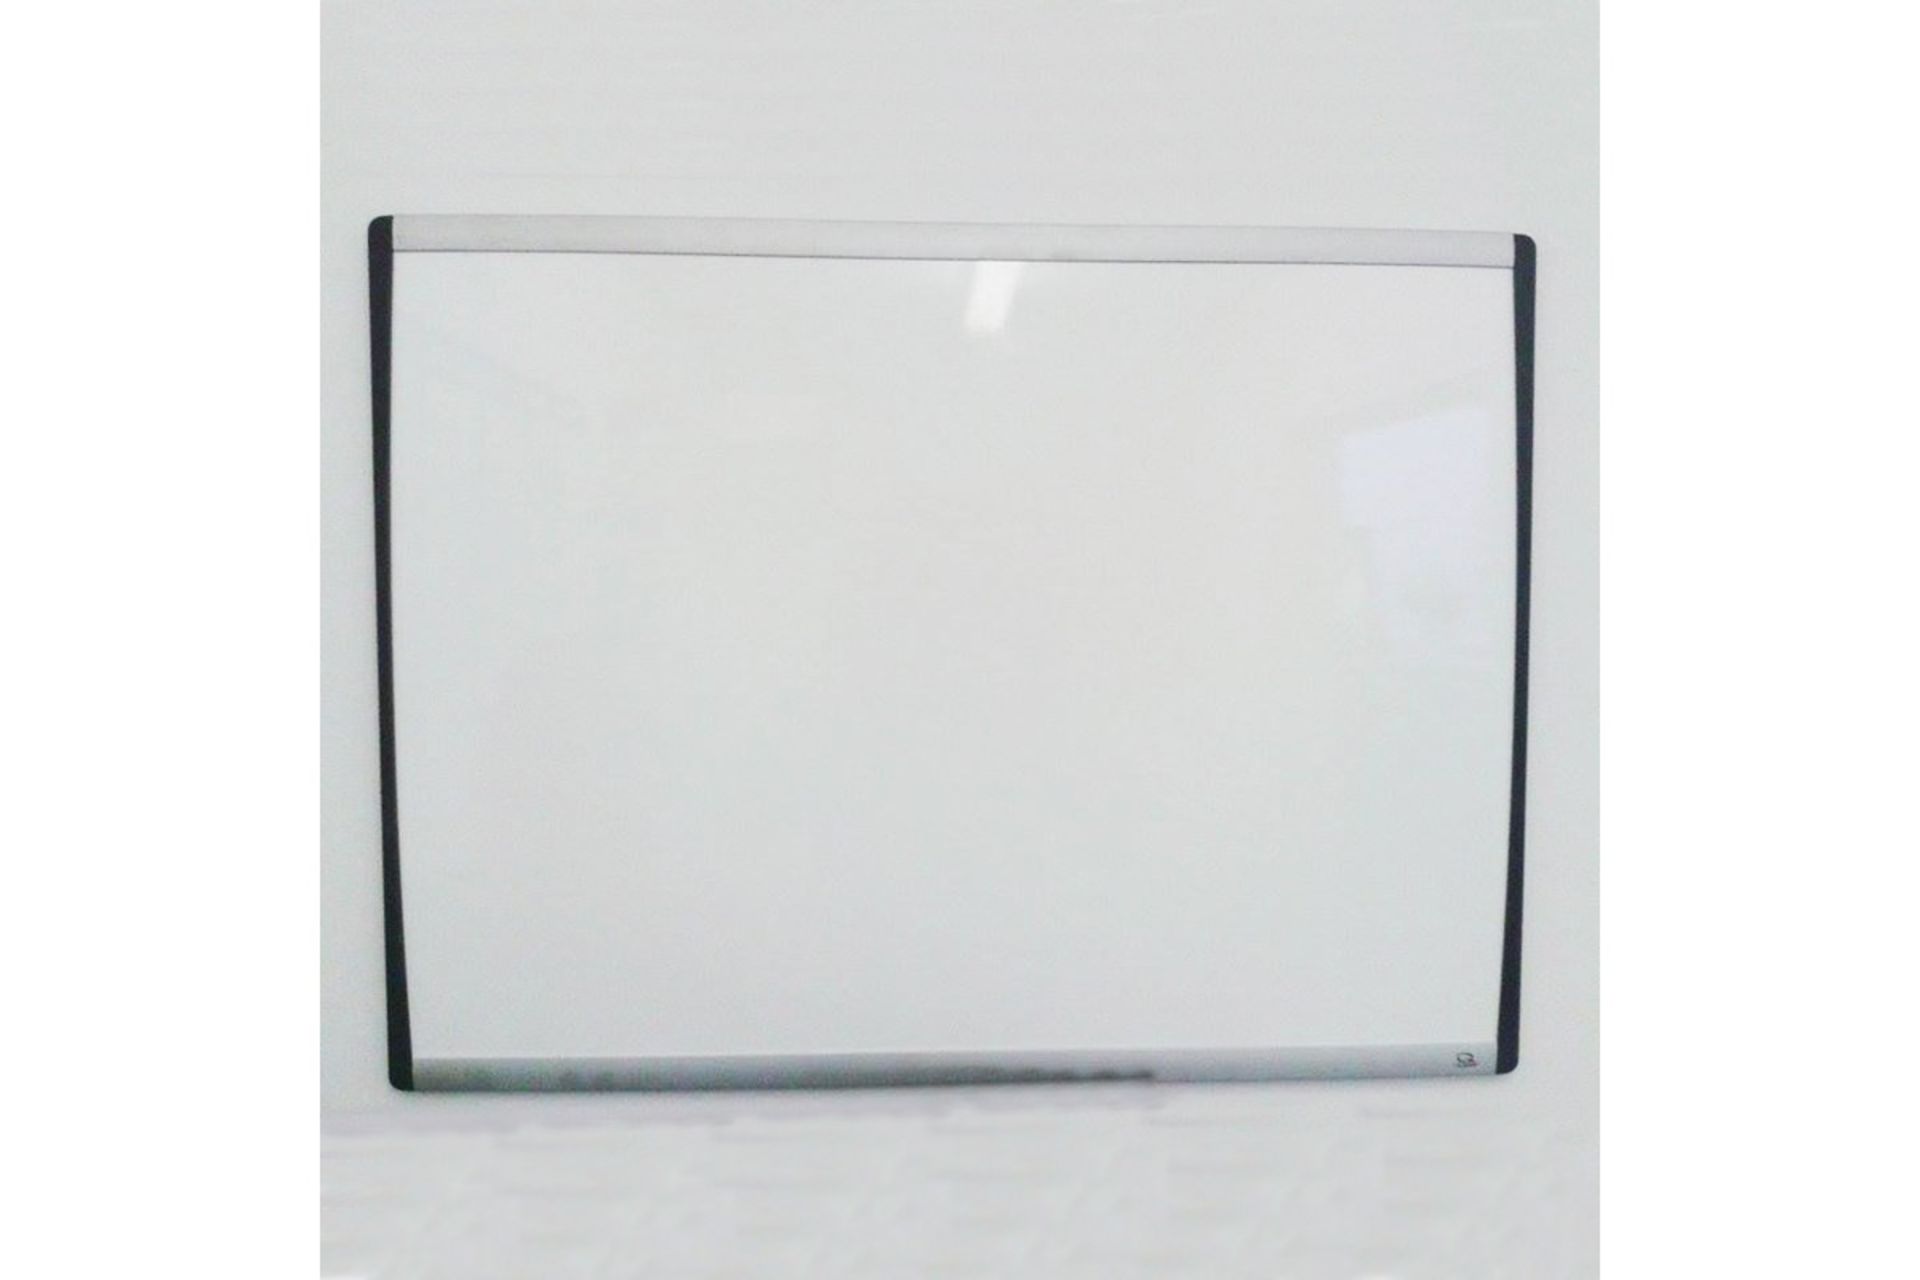 V Brand New Magnetic Whiteboard (size: 60CM x 45CM) Frame made from high quality aluminium X 2